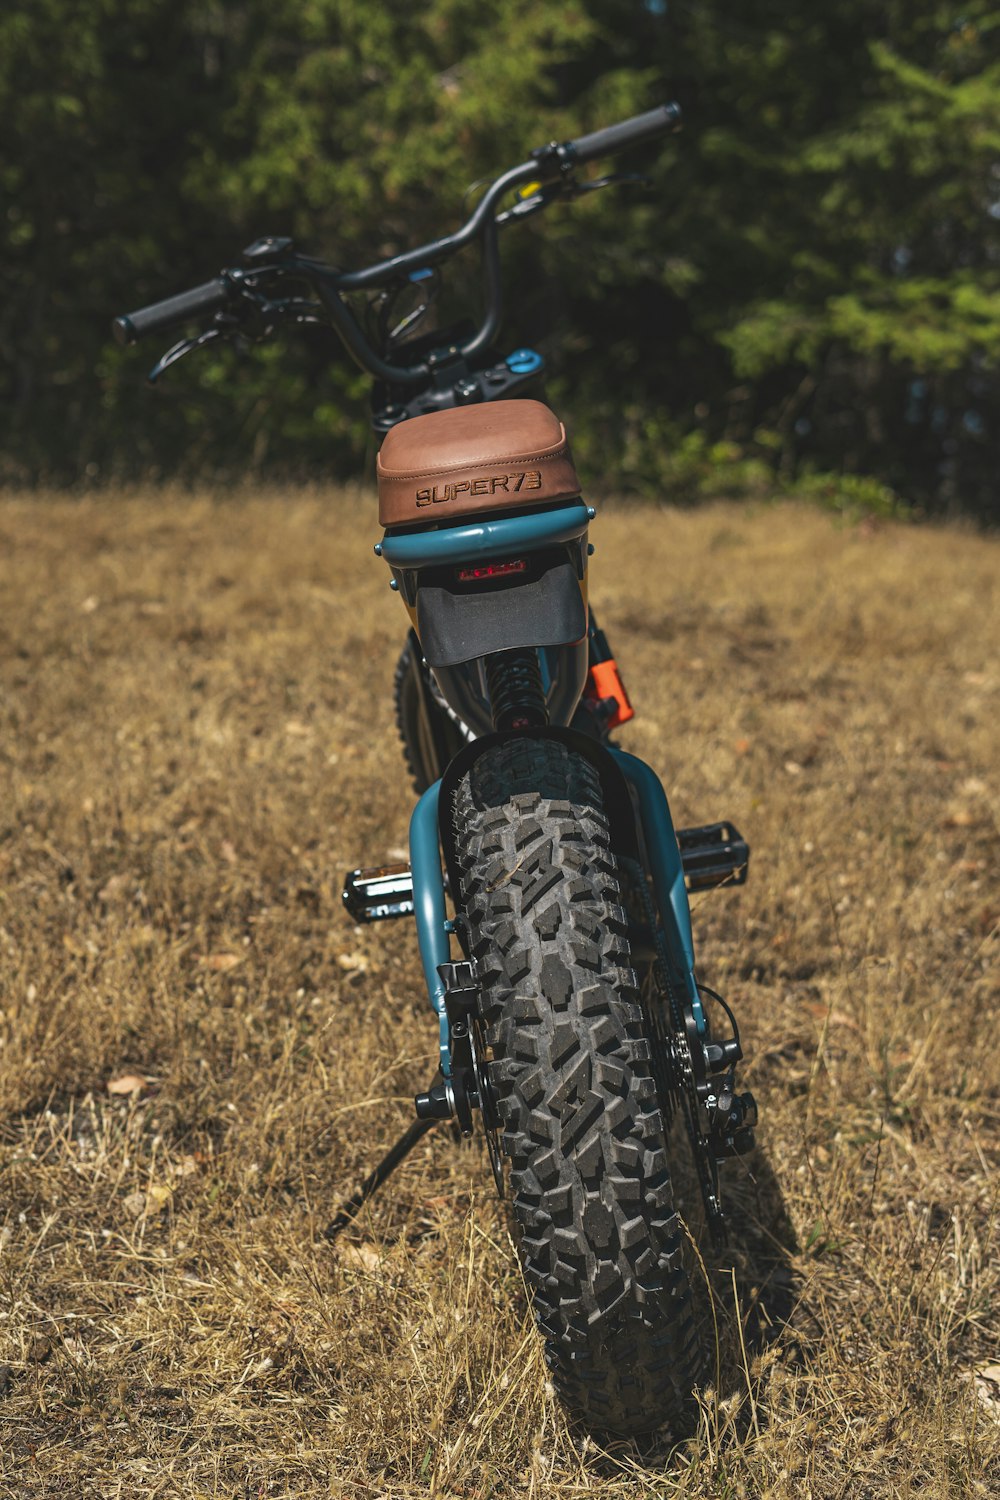 a blue motorcycle parked in a field with trees in the background